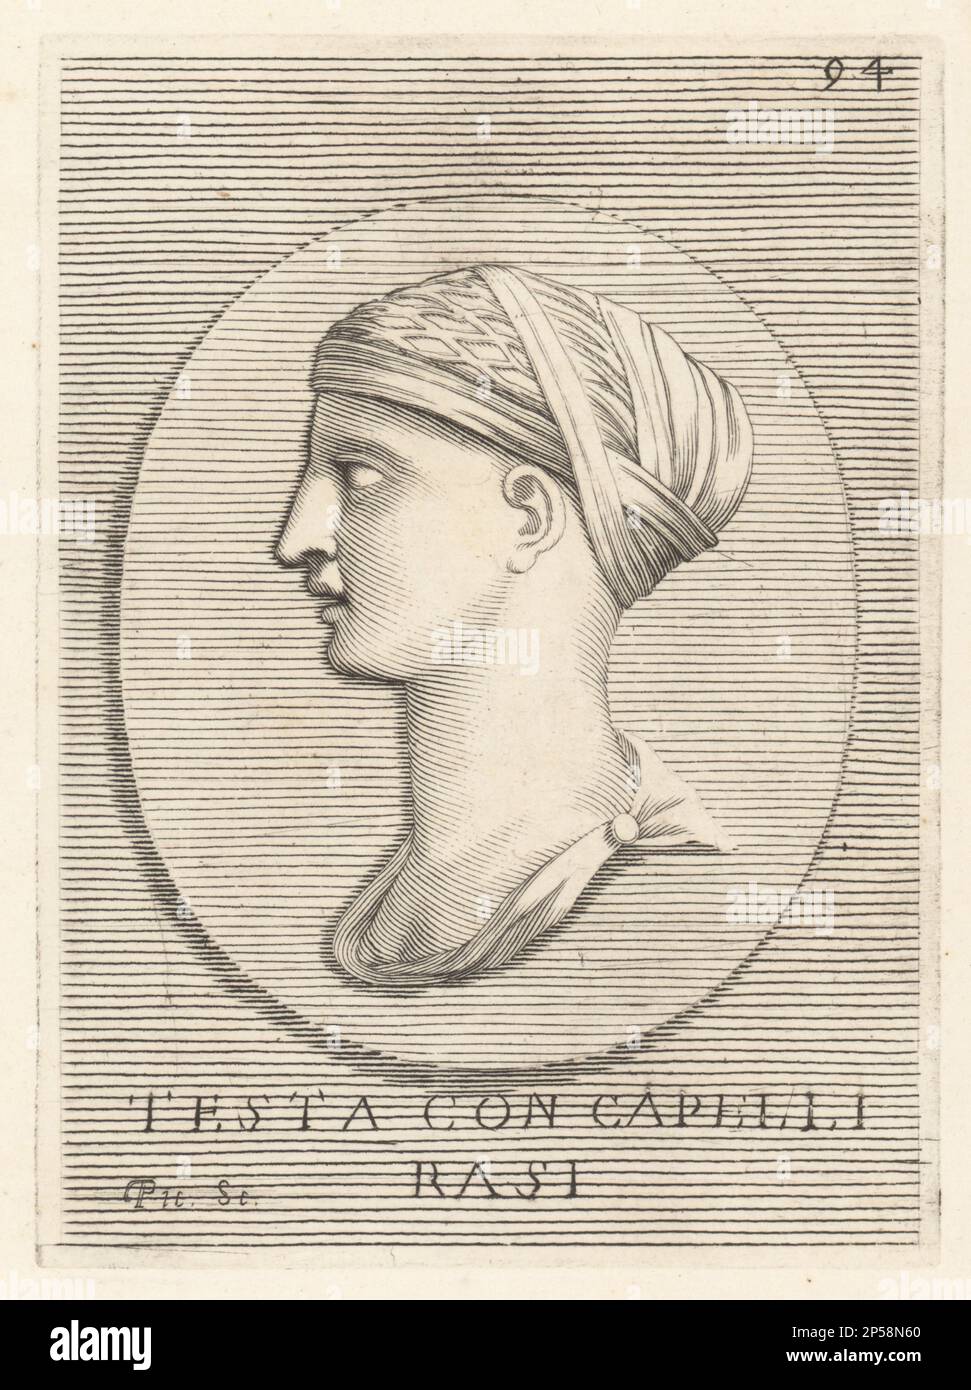 Bust on an unknown female with shaved head wrapped in headdress. Vestel Virgins, virgin acolytes at a Temple of Cassandra, or Lacedaemonian maidens all shaved their heads. Testa incognita con cepelli rasi. Copperplate engraving by Etienne Picart after Giovanni Angelo Canini from Iconografia, cioe disegni d'imagini de famosissimi monarchi, regi, filososi, poeti ed oratori dell' Antichita, Drawings of images of famous monarchs, kings, philosophers, poets and orators of Antiquity, Ignatio de’Lazari, Rome, 1699. Stock Photo